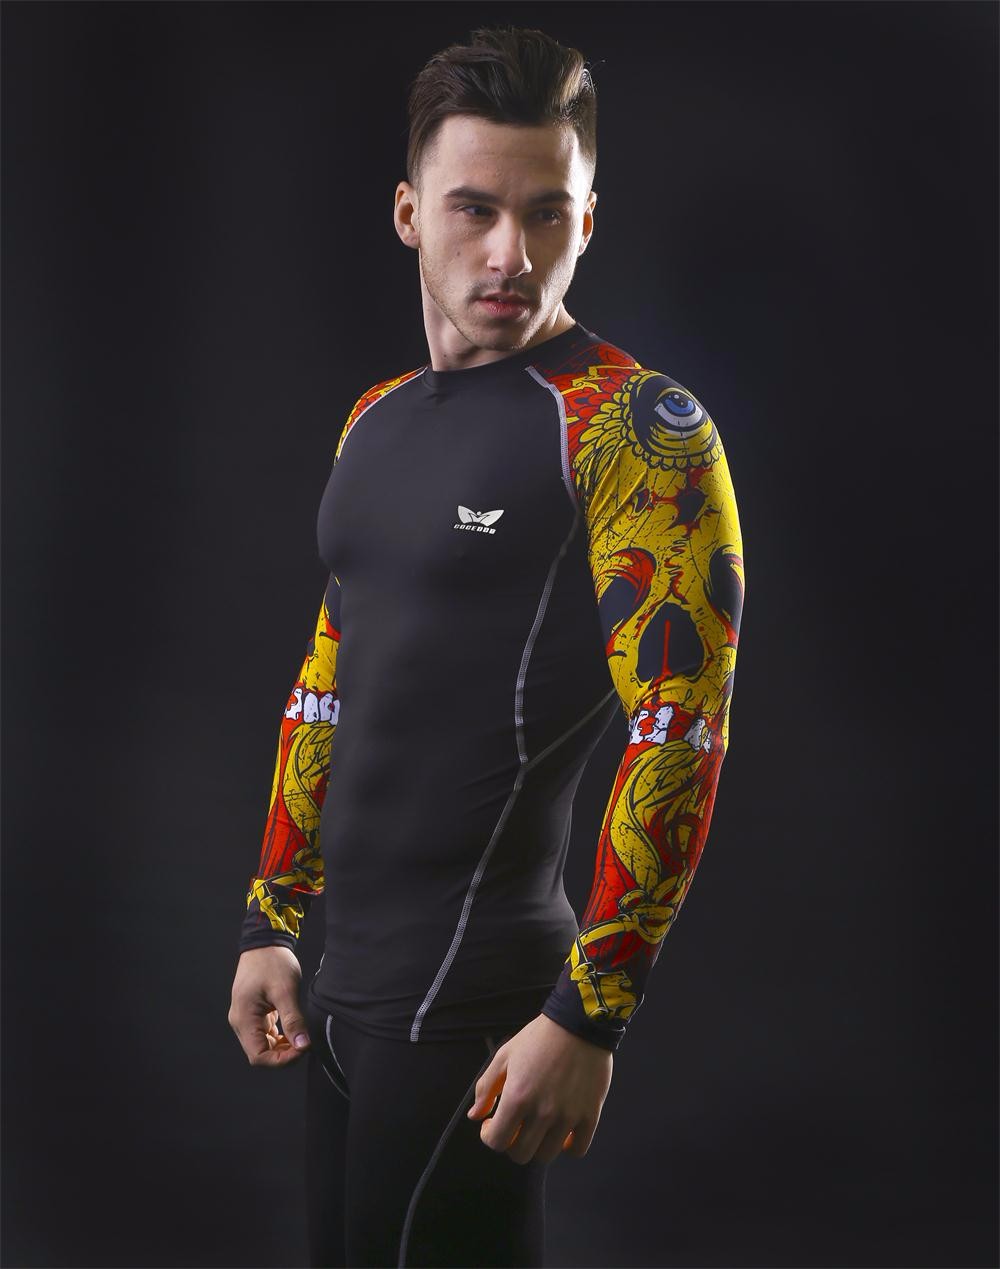 Men39s-Compression-Polyester-Tops-amp-Tees-Fashion-3D-Prints-Fitness-Skin-Tights-Long-Sleeve-Quick-d-32736074668